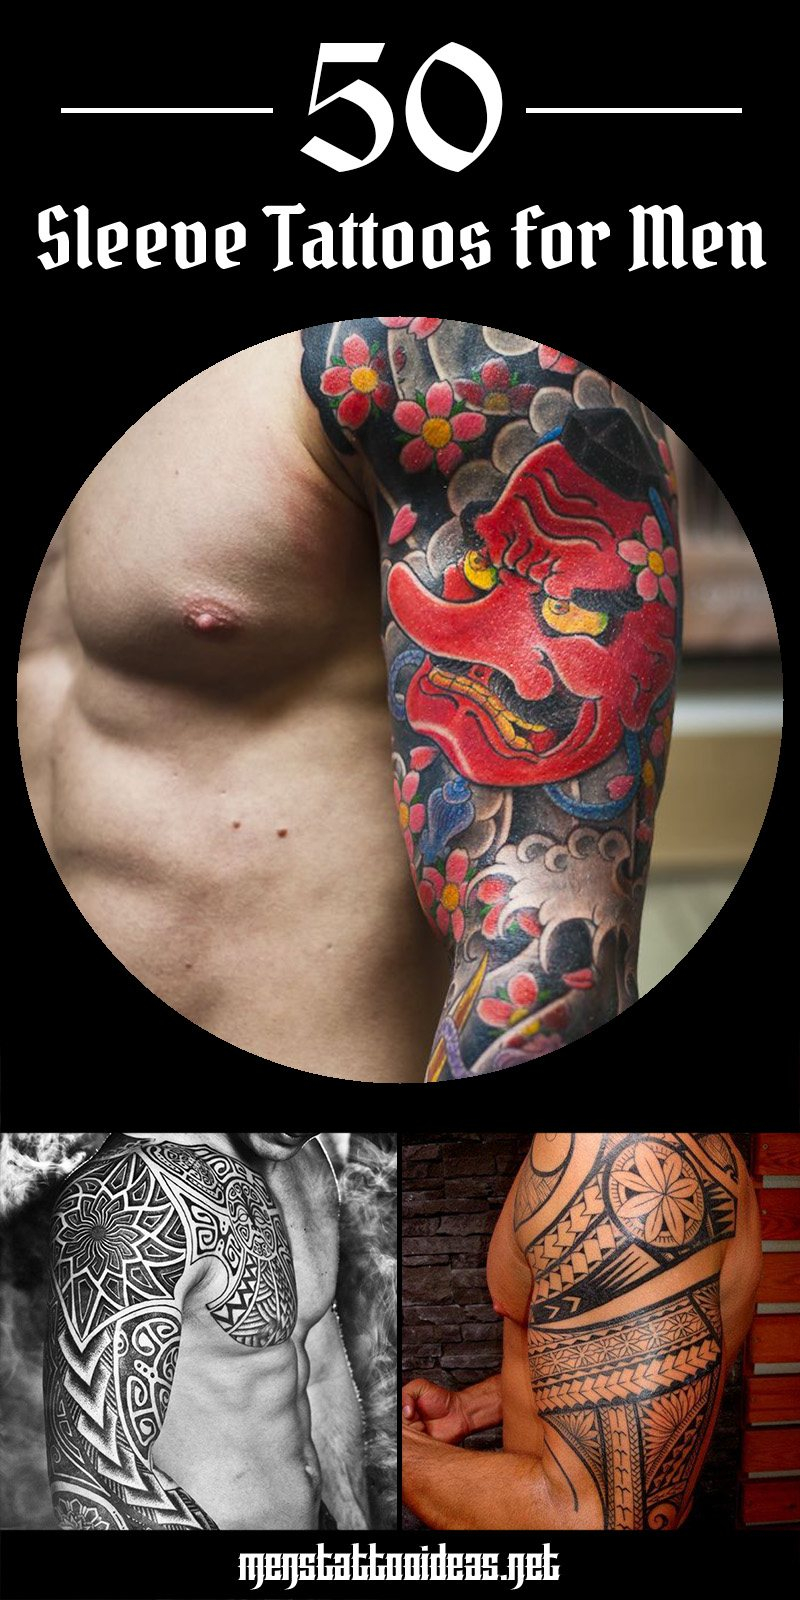 47 Sleeve Tattoos For Men Design Ideas For Guys intended for dimensions 800 X 1600